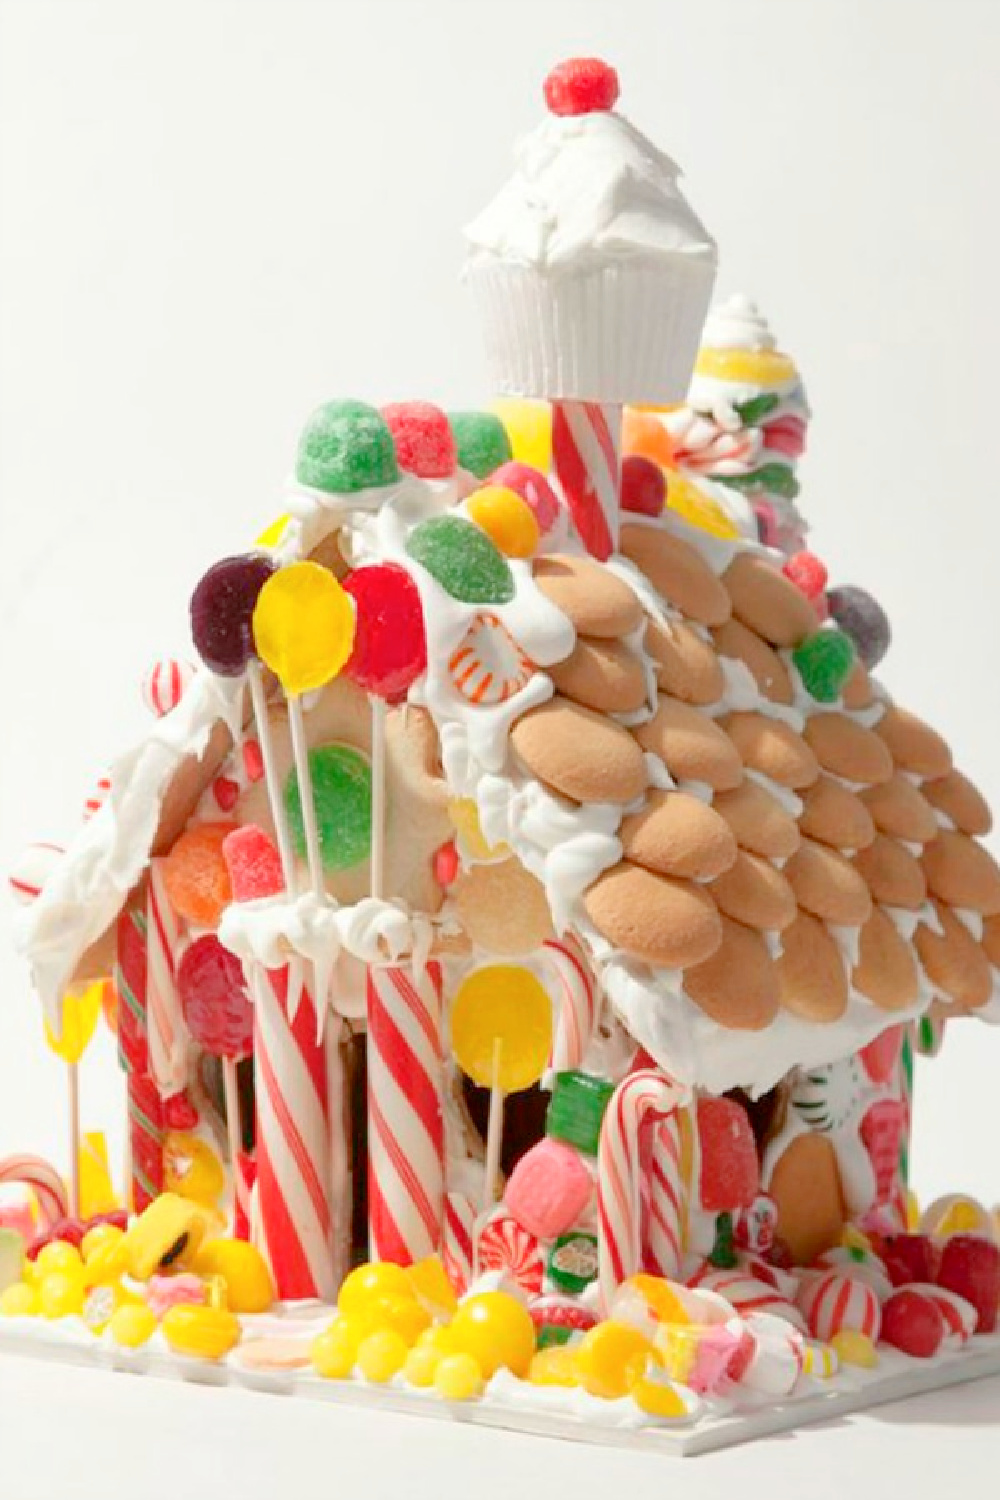 Cupcake chimney on a fanciful candy house decorated with vanilla wafers. #gingerbreadhouse #christmasbaking #holidaydiy